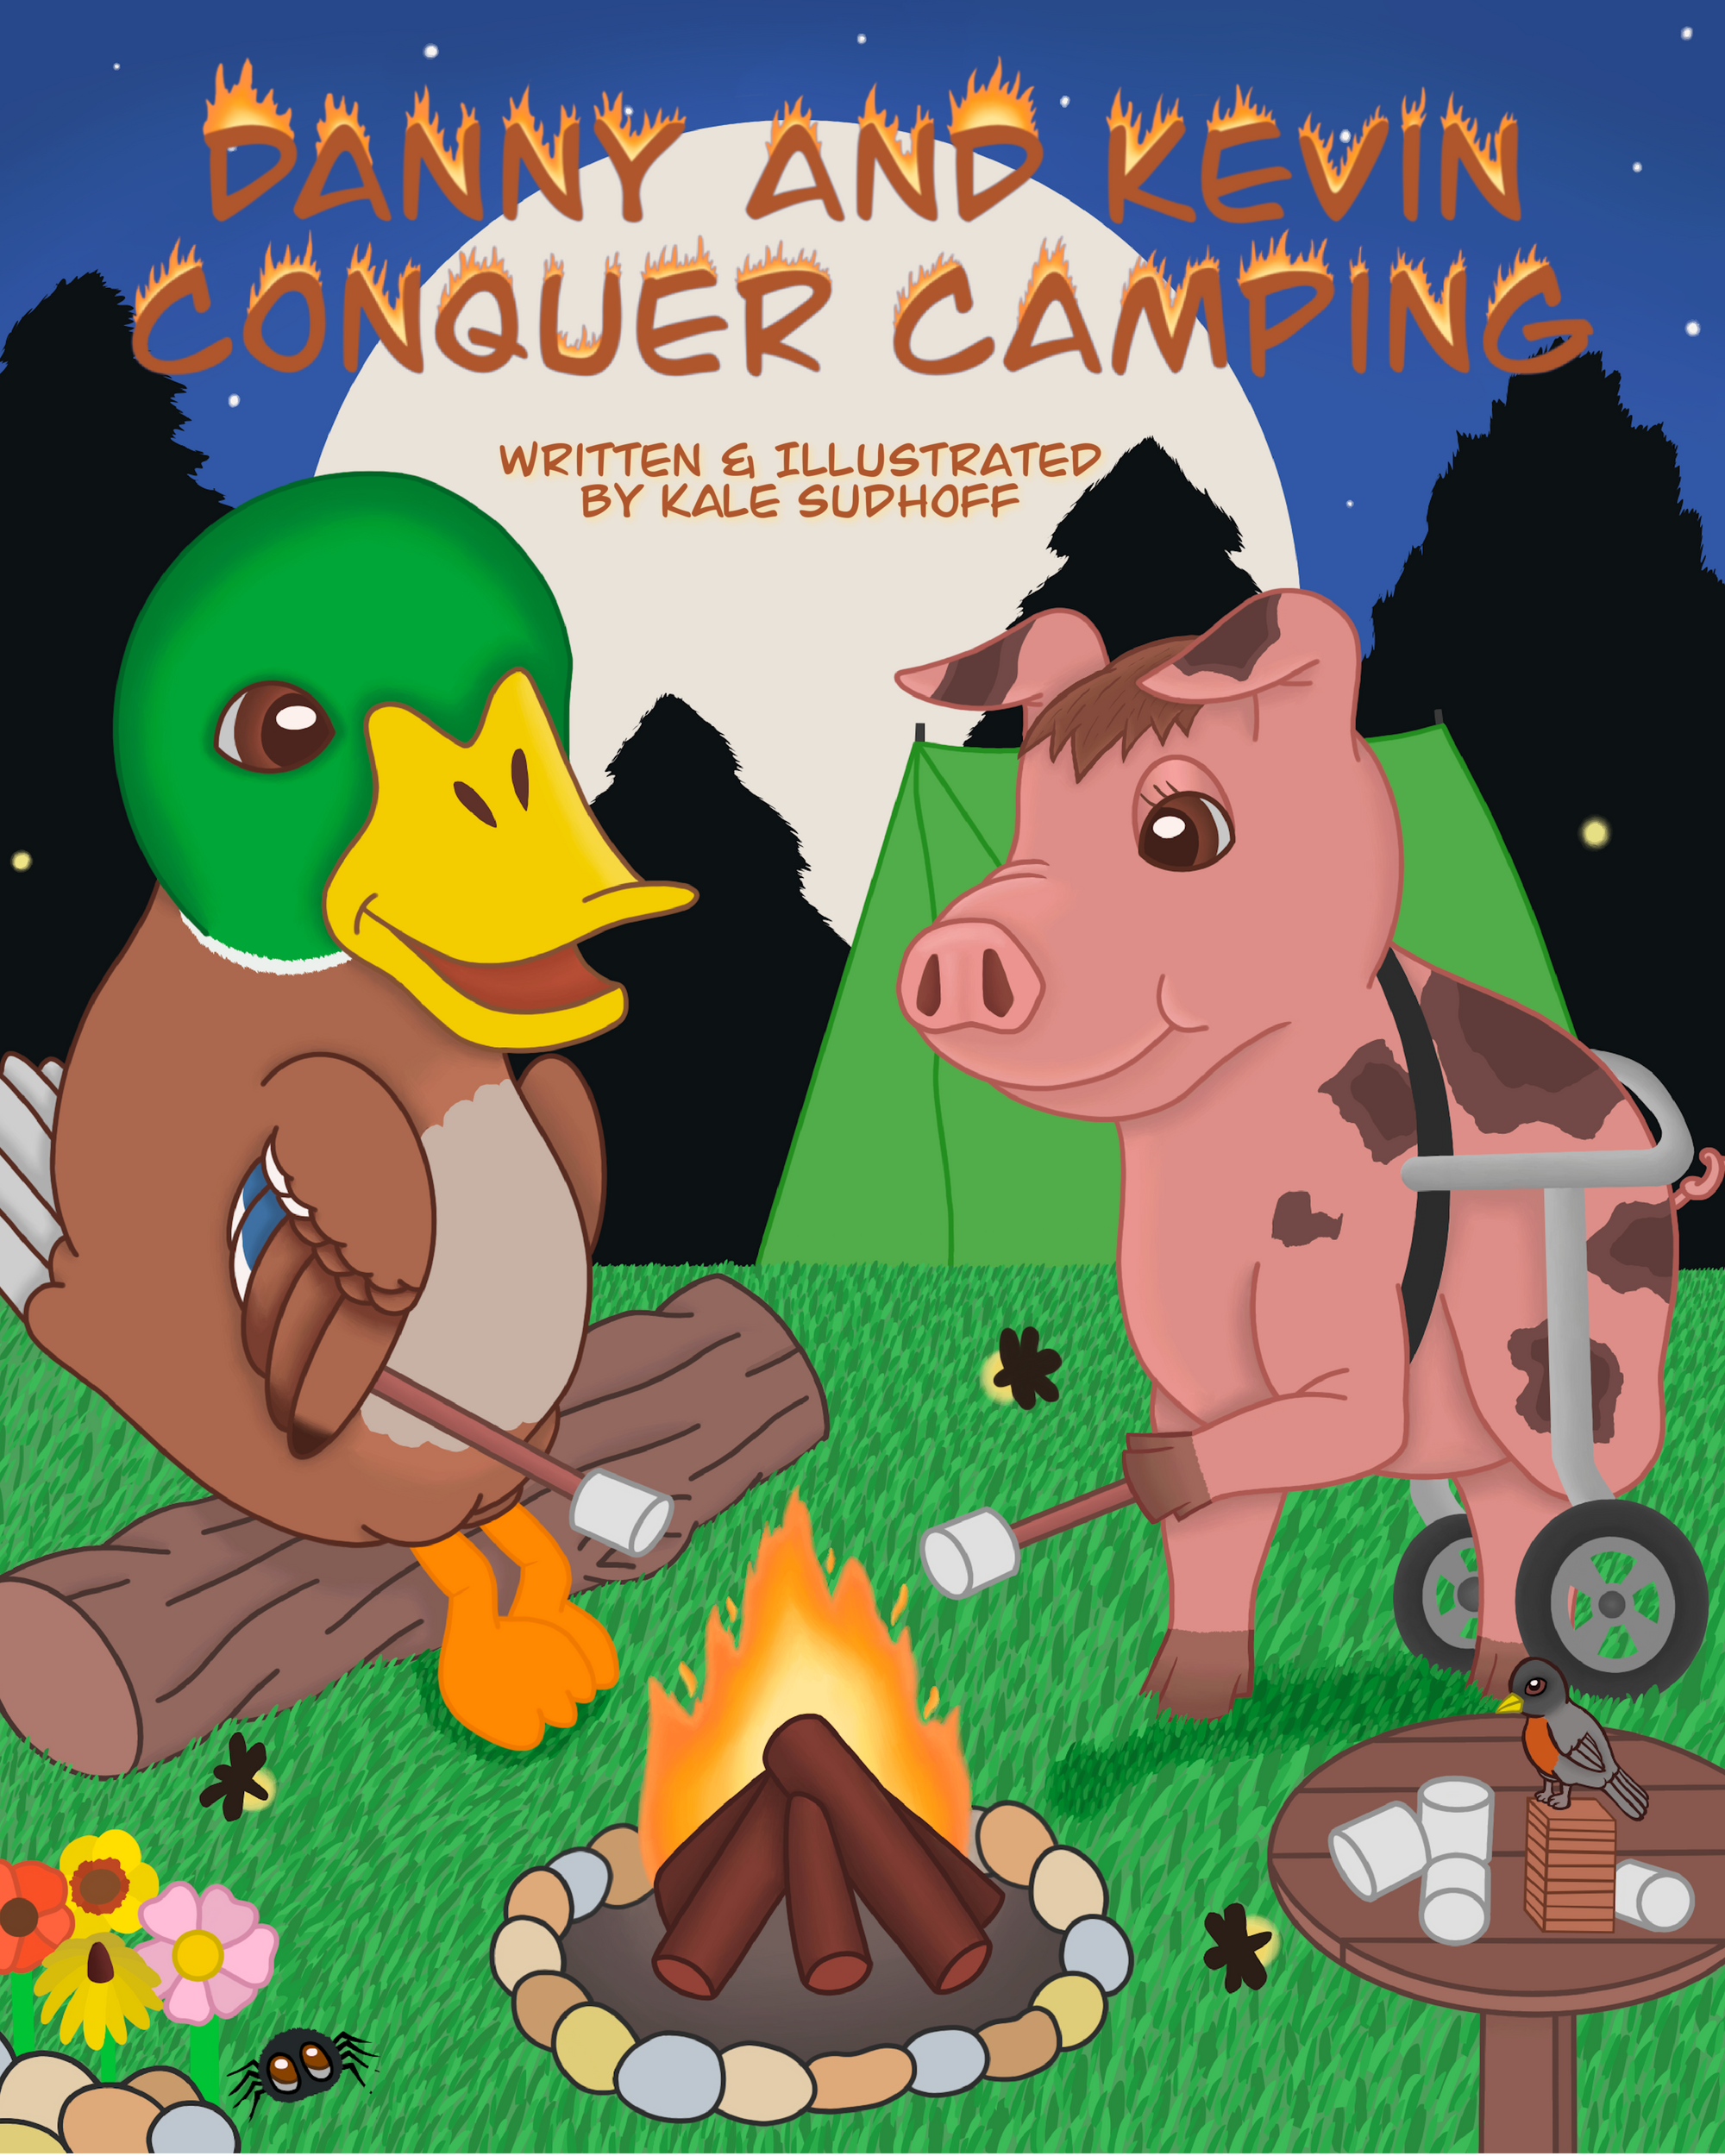 Danny and Kevin Conquer Camping